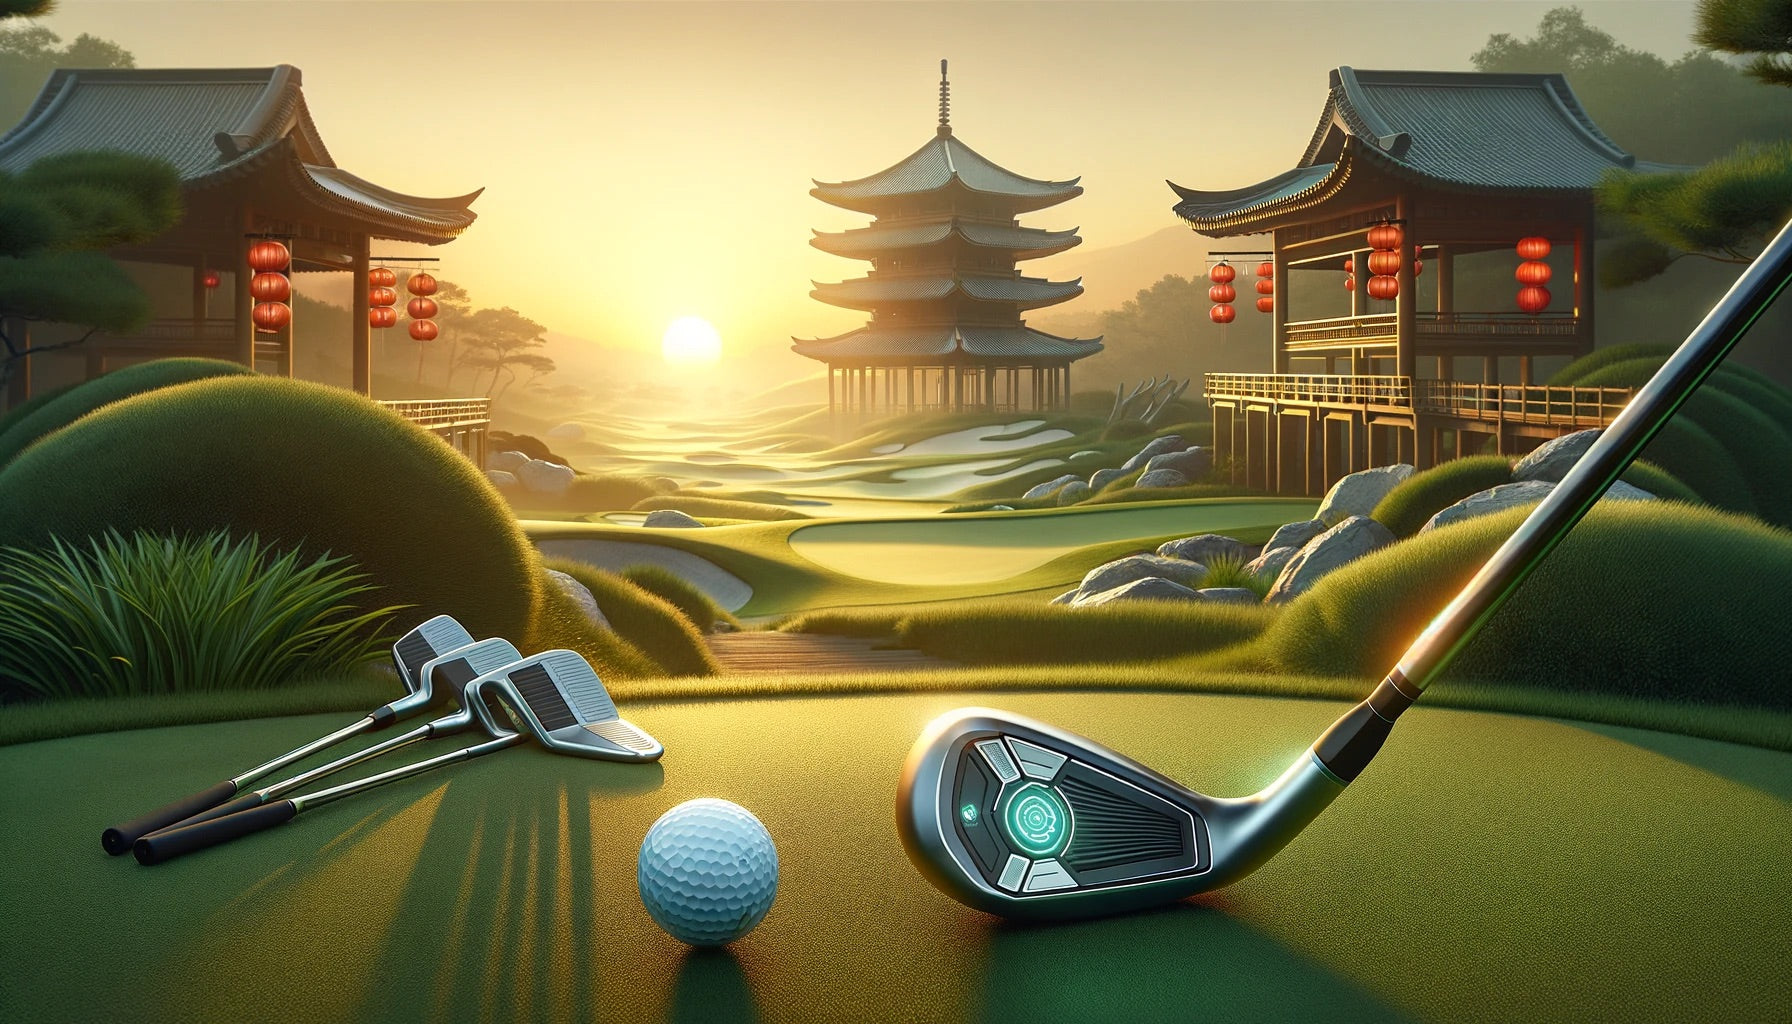 Embracing the Art of Golf: The Fusion of Asian Discipline and American Enjoyment